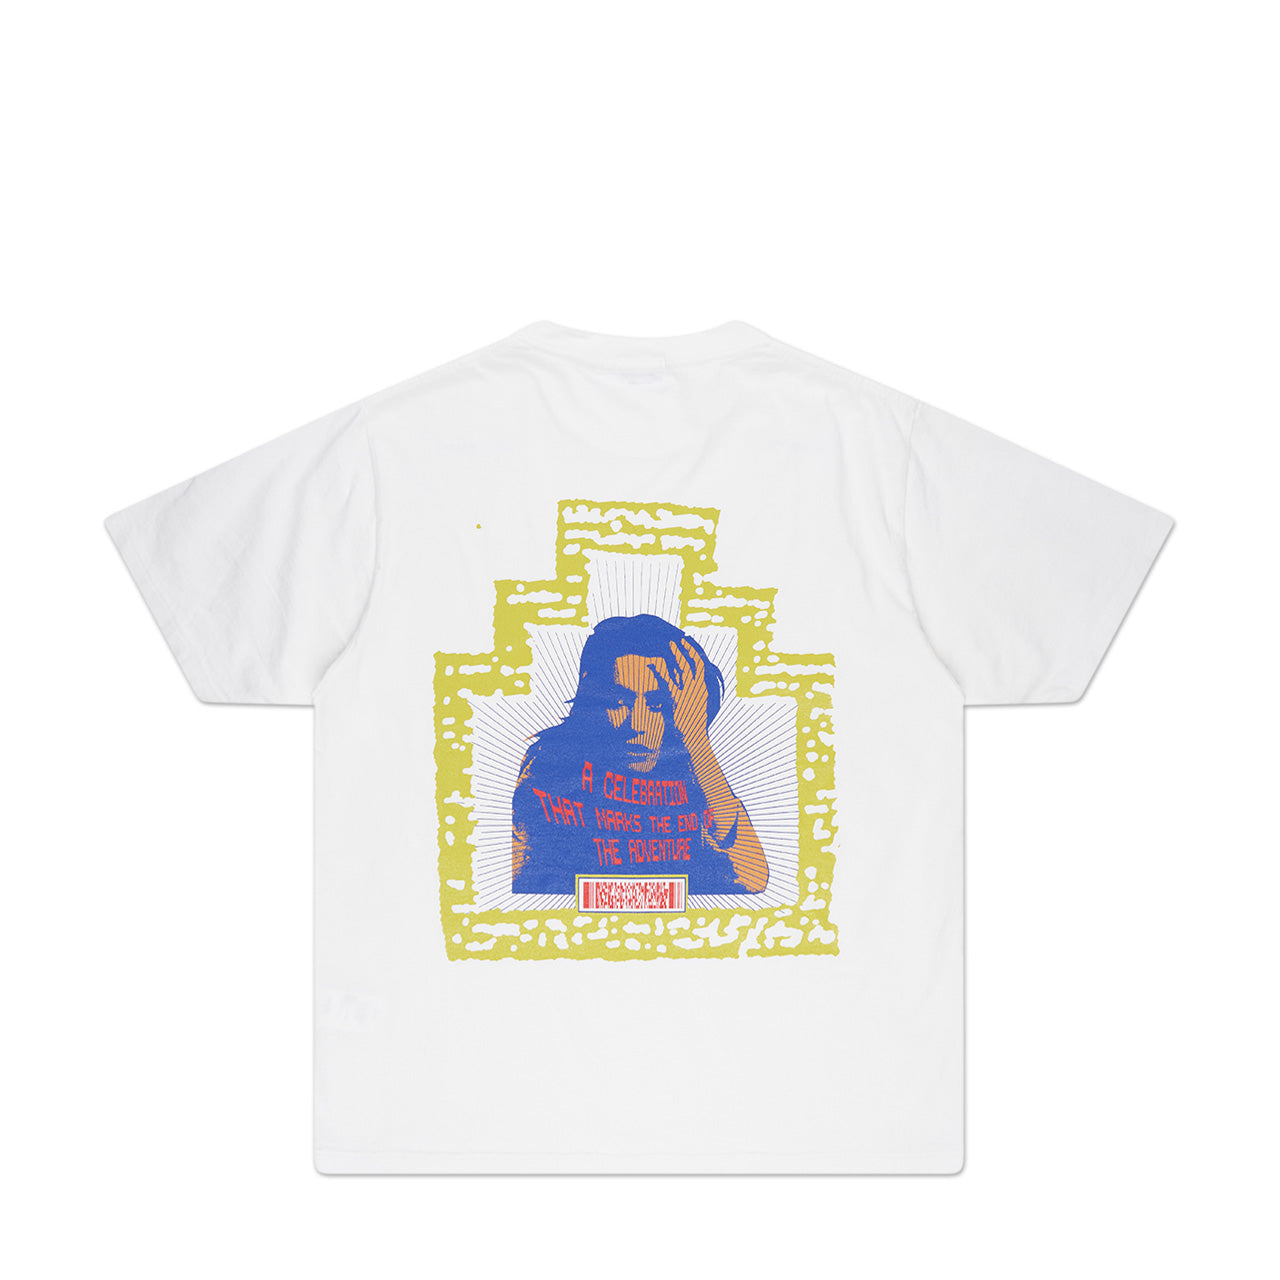 cav empt end of the adventure t-shirt (white)